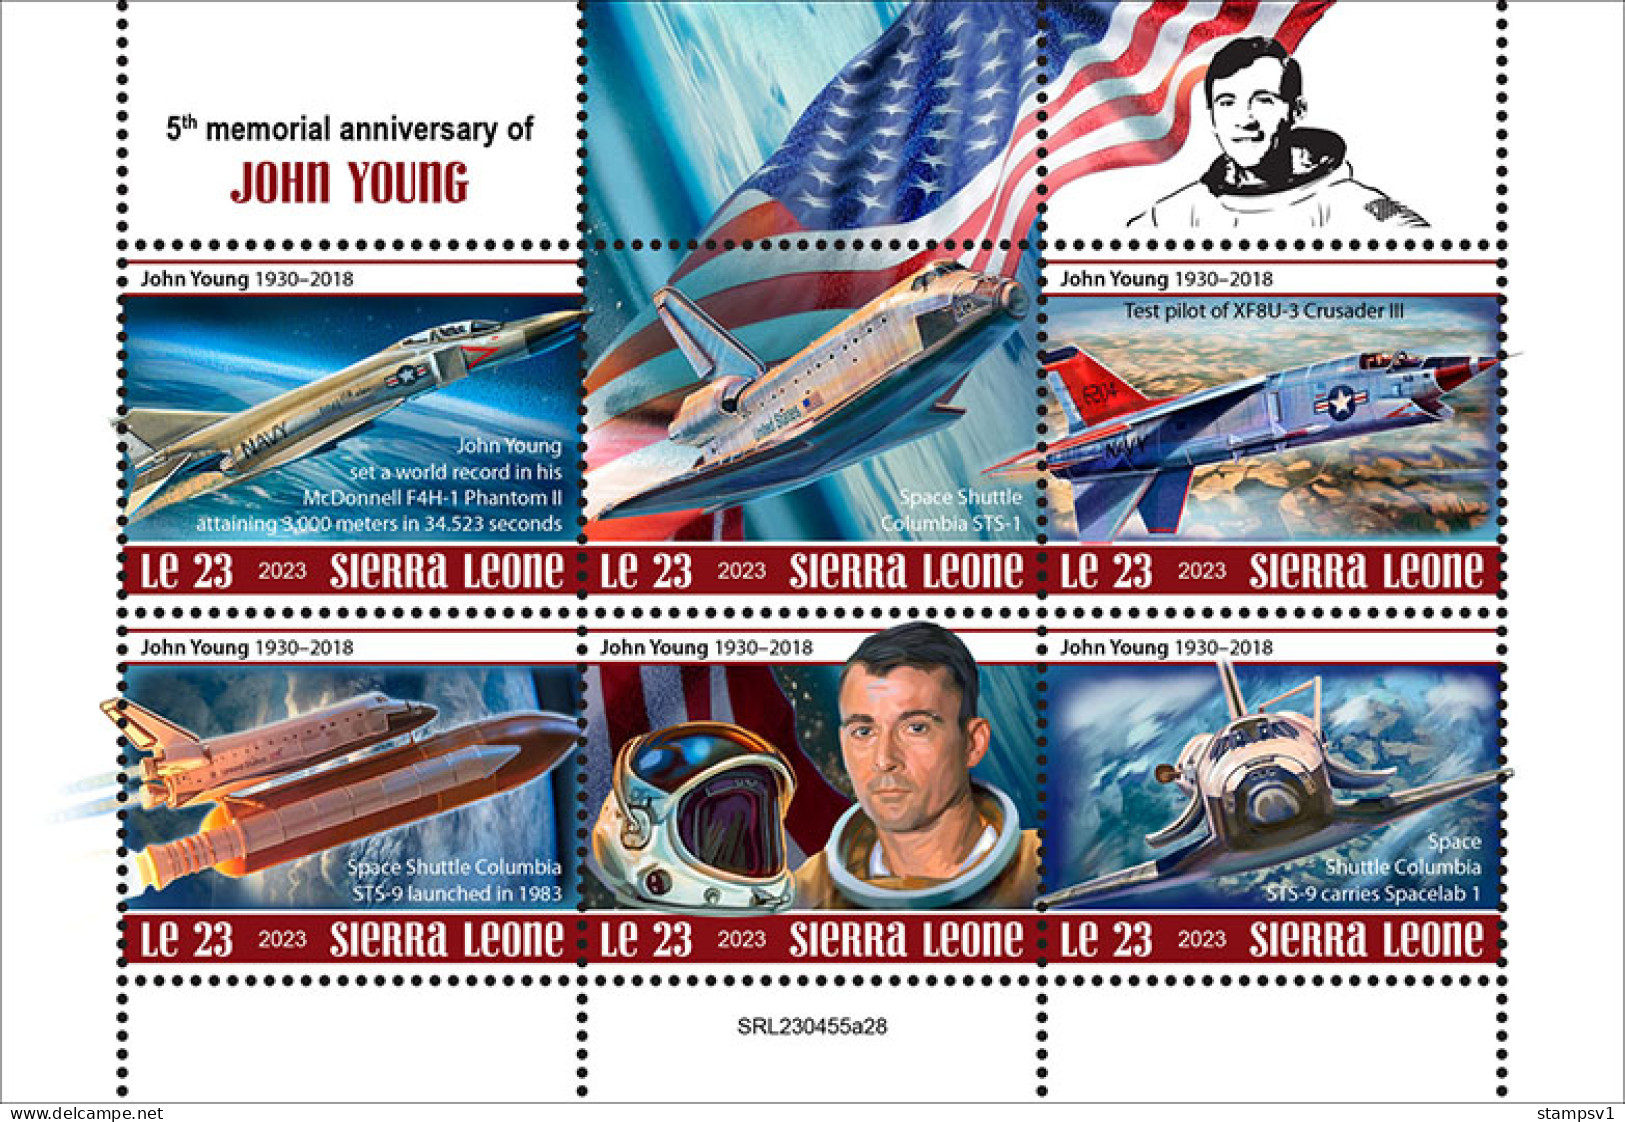 Sierra Leone  2023 Tribute To John Young. (445a28) OFFICIAL ISSUE - Avions